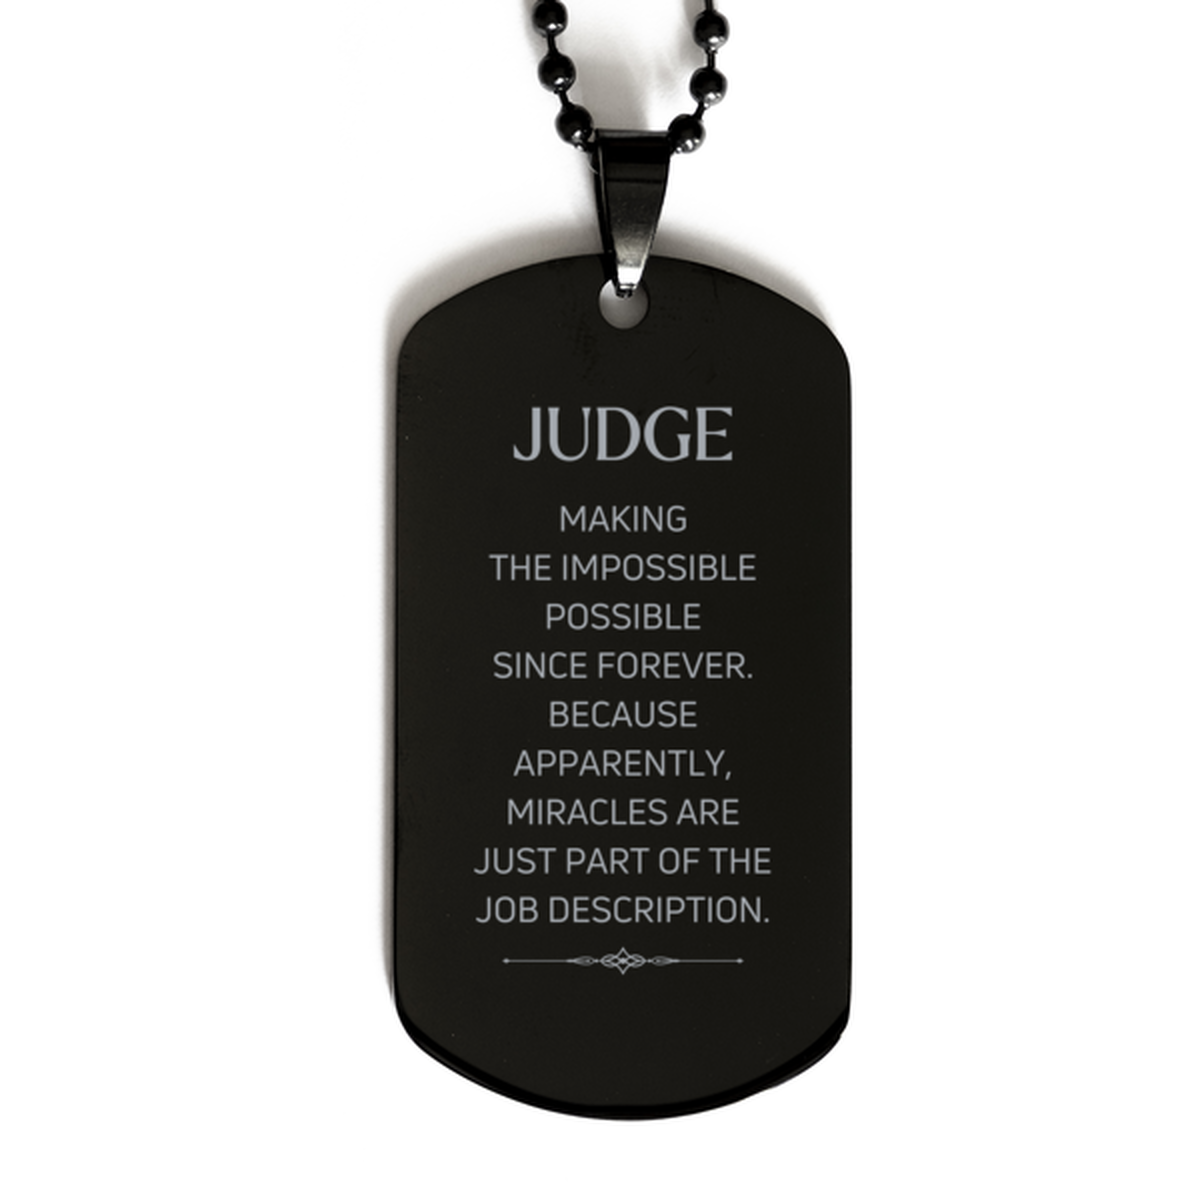 Funny Judge Gifts, Miracles are just part of the job description, Inspirational Birthday Black Dog Tag For Judge, Men, Women, Coworkers, Friends, Boss